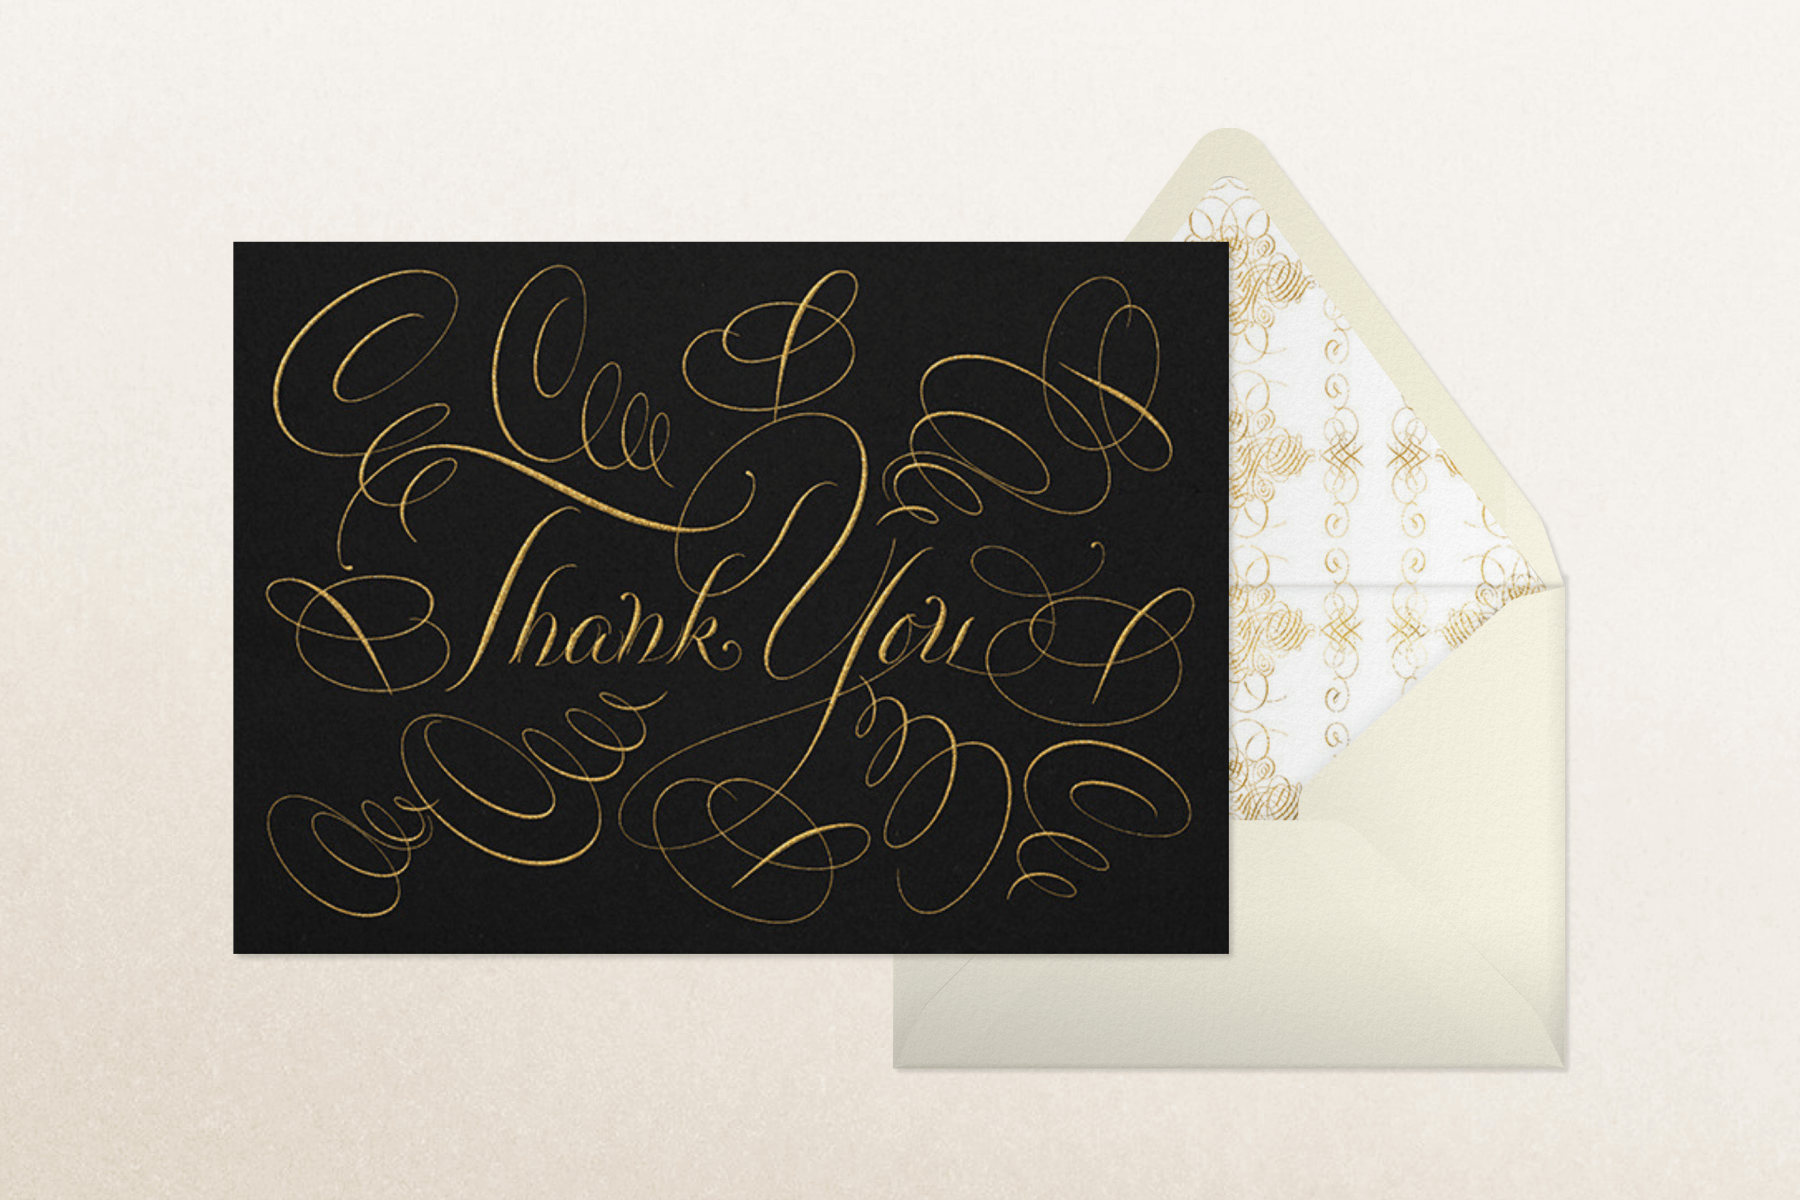 A thank you card with the words written in gold on black in heavily flourished calligraphy.